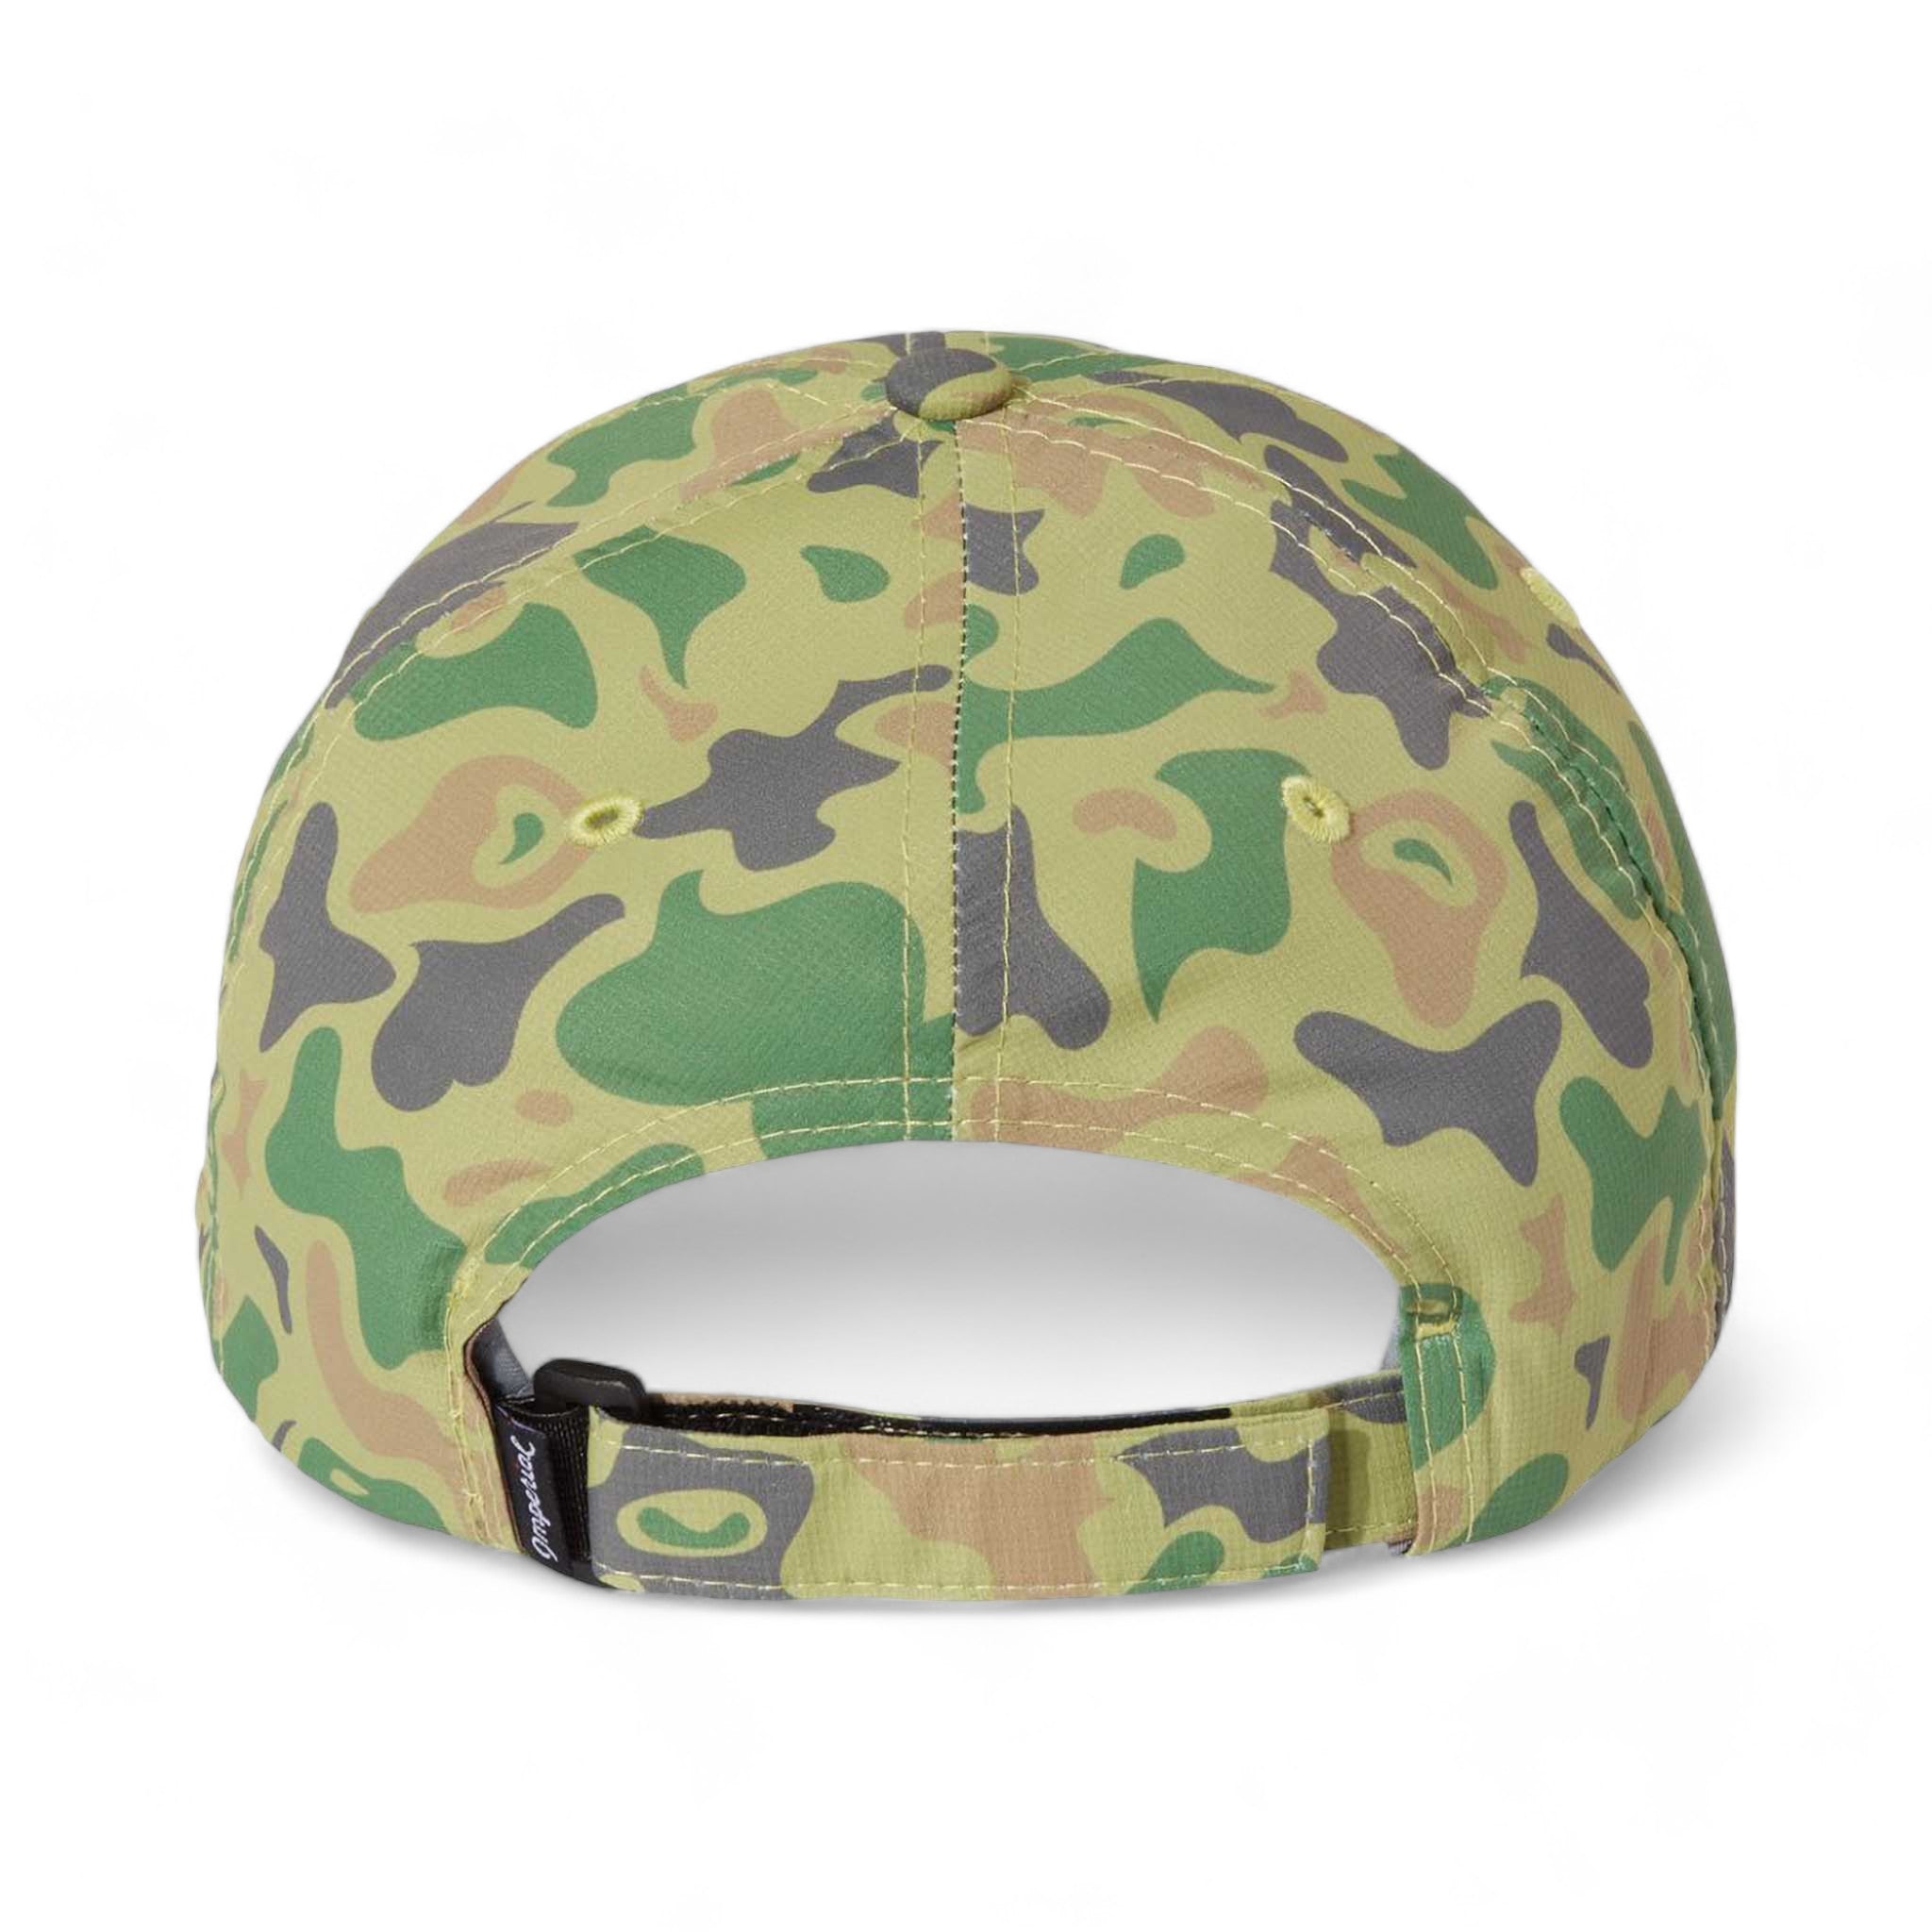 Back view of Imperial X210R custom hat in green duck camo